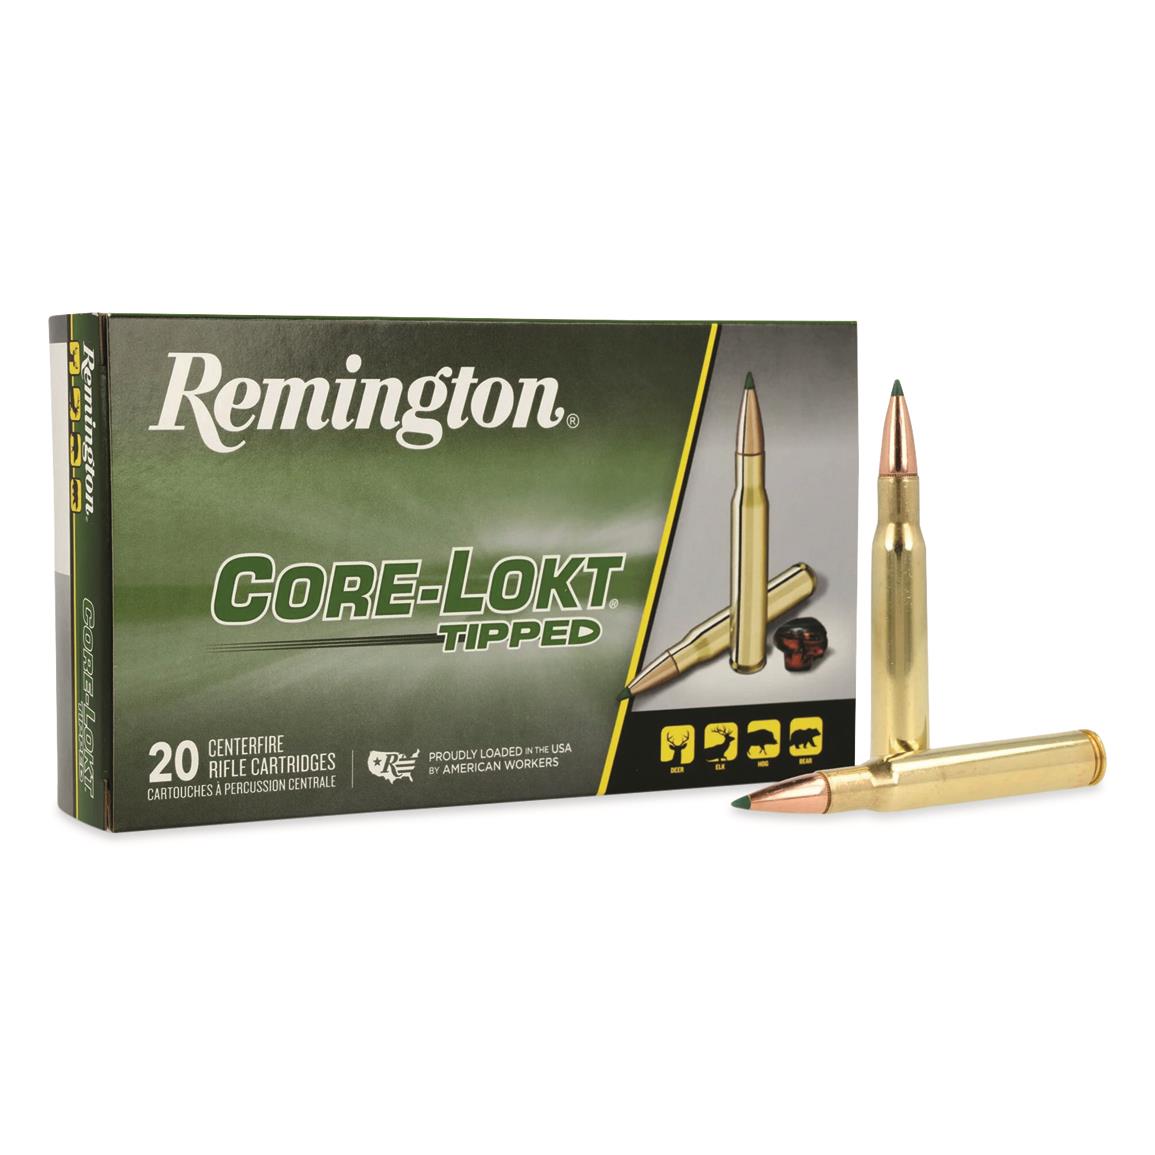 Remington Core-Lokt Tipped, .30-06 Spr., Polymer Tip, 150 Grain, 20 Rounds